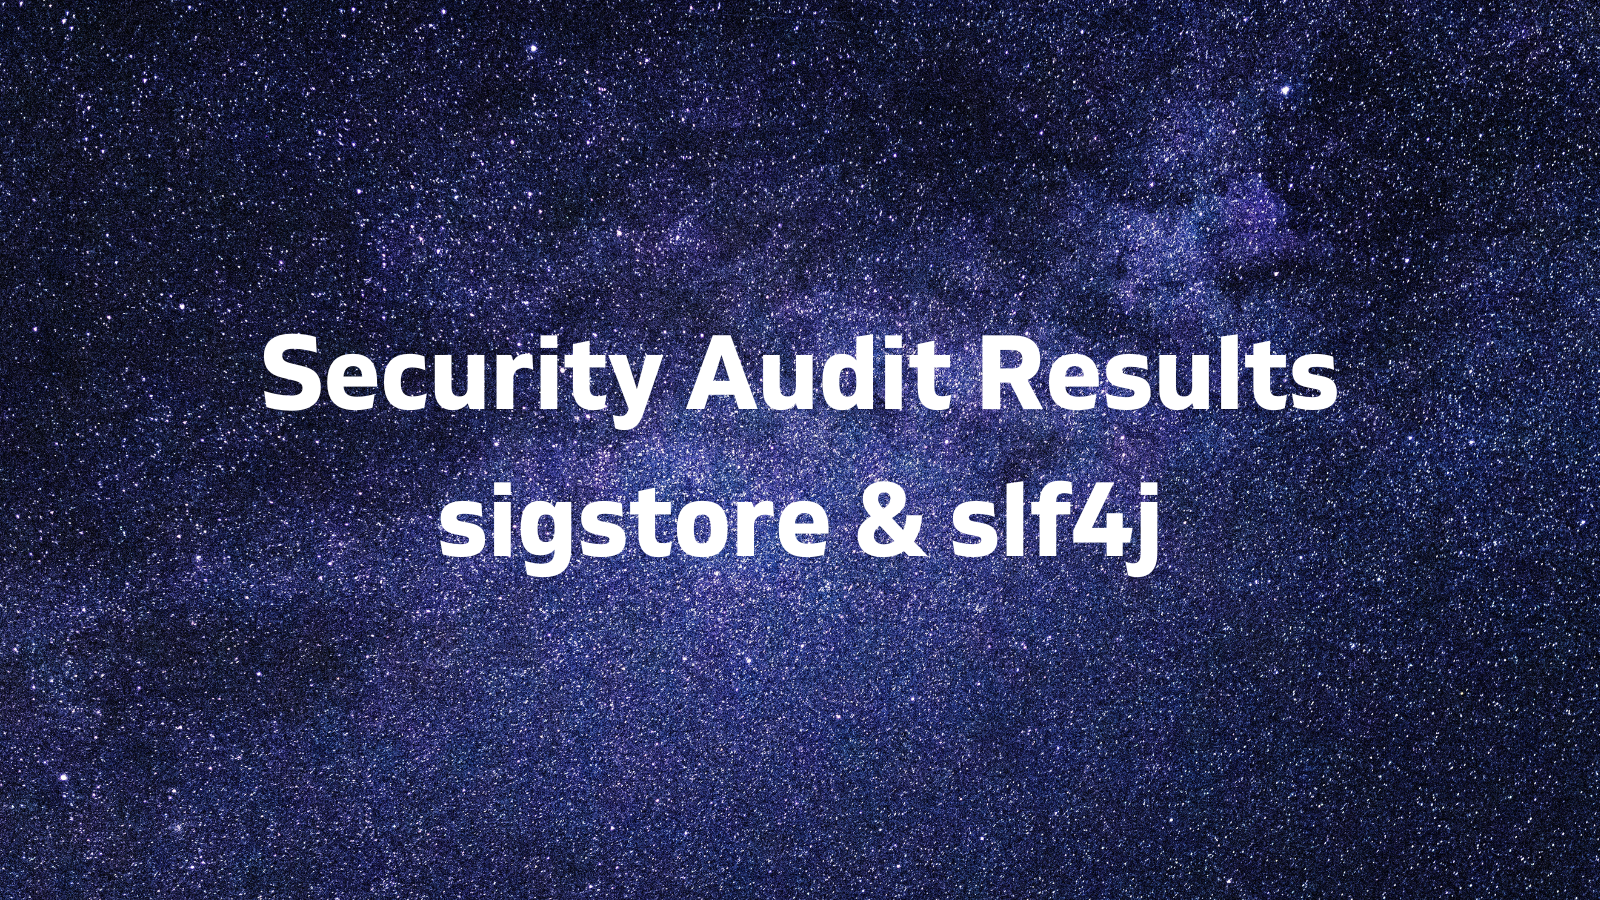 Security Audit Results for sigstore and slf4j